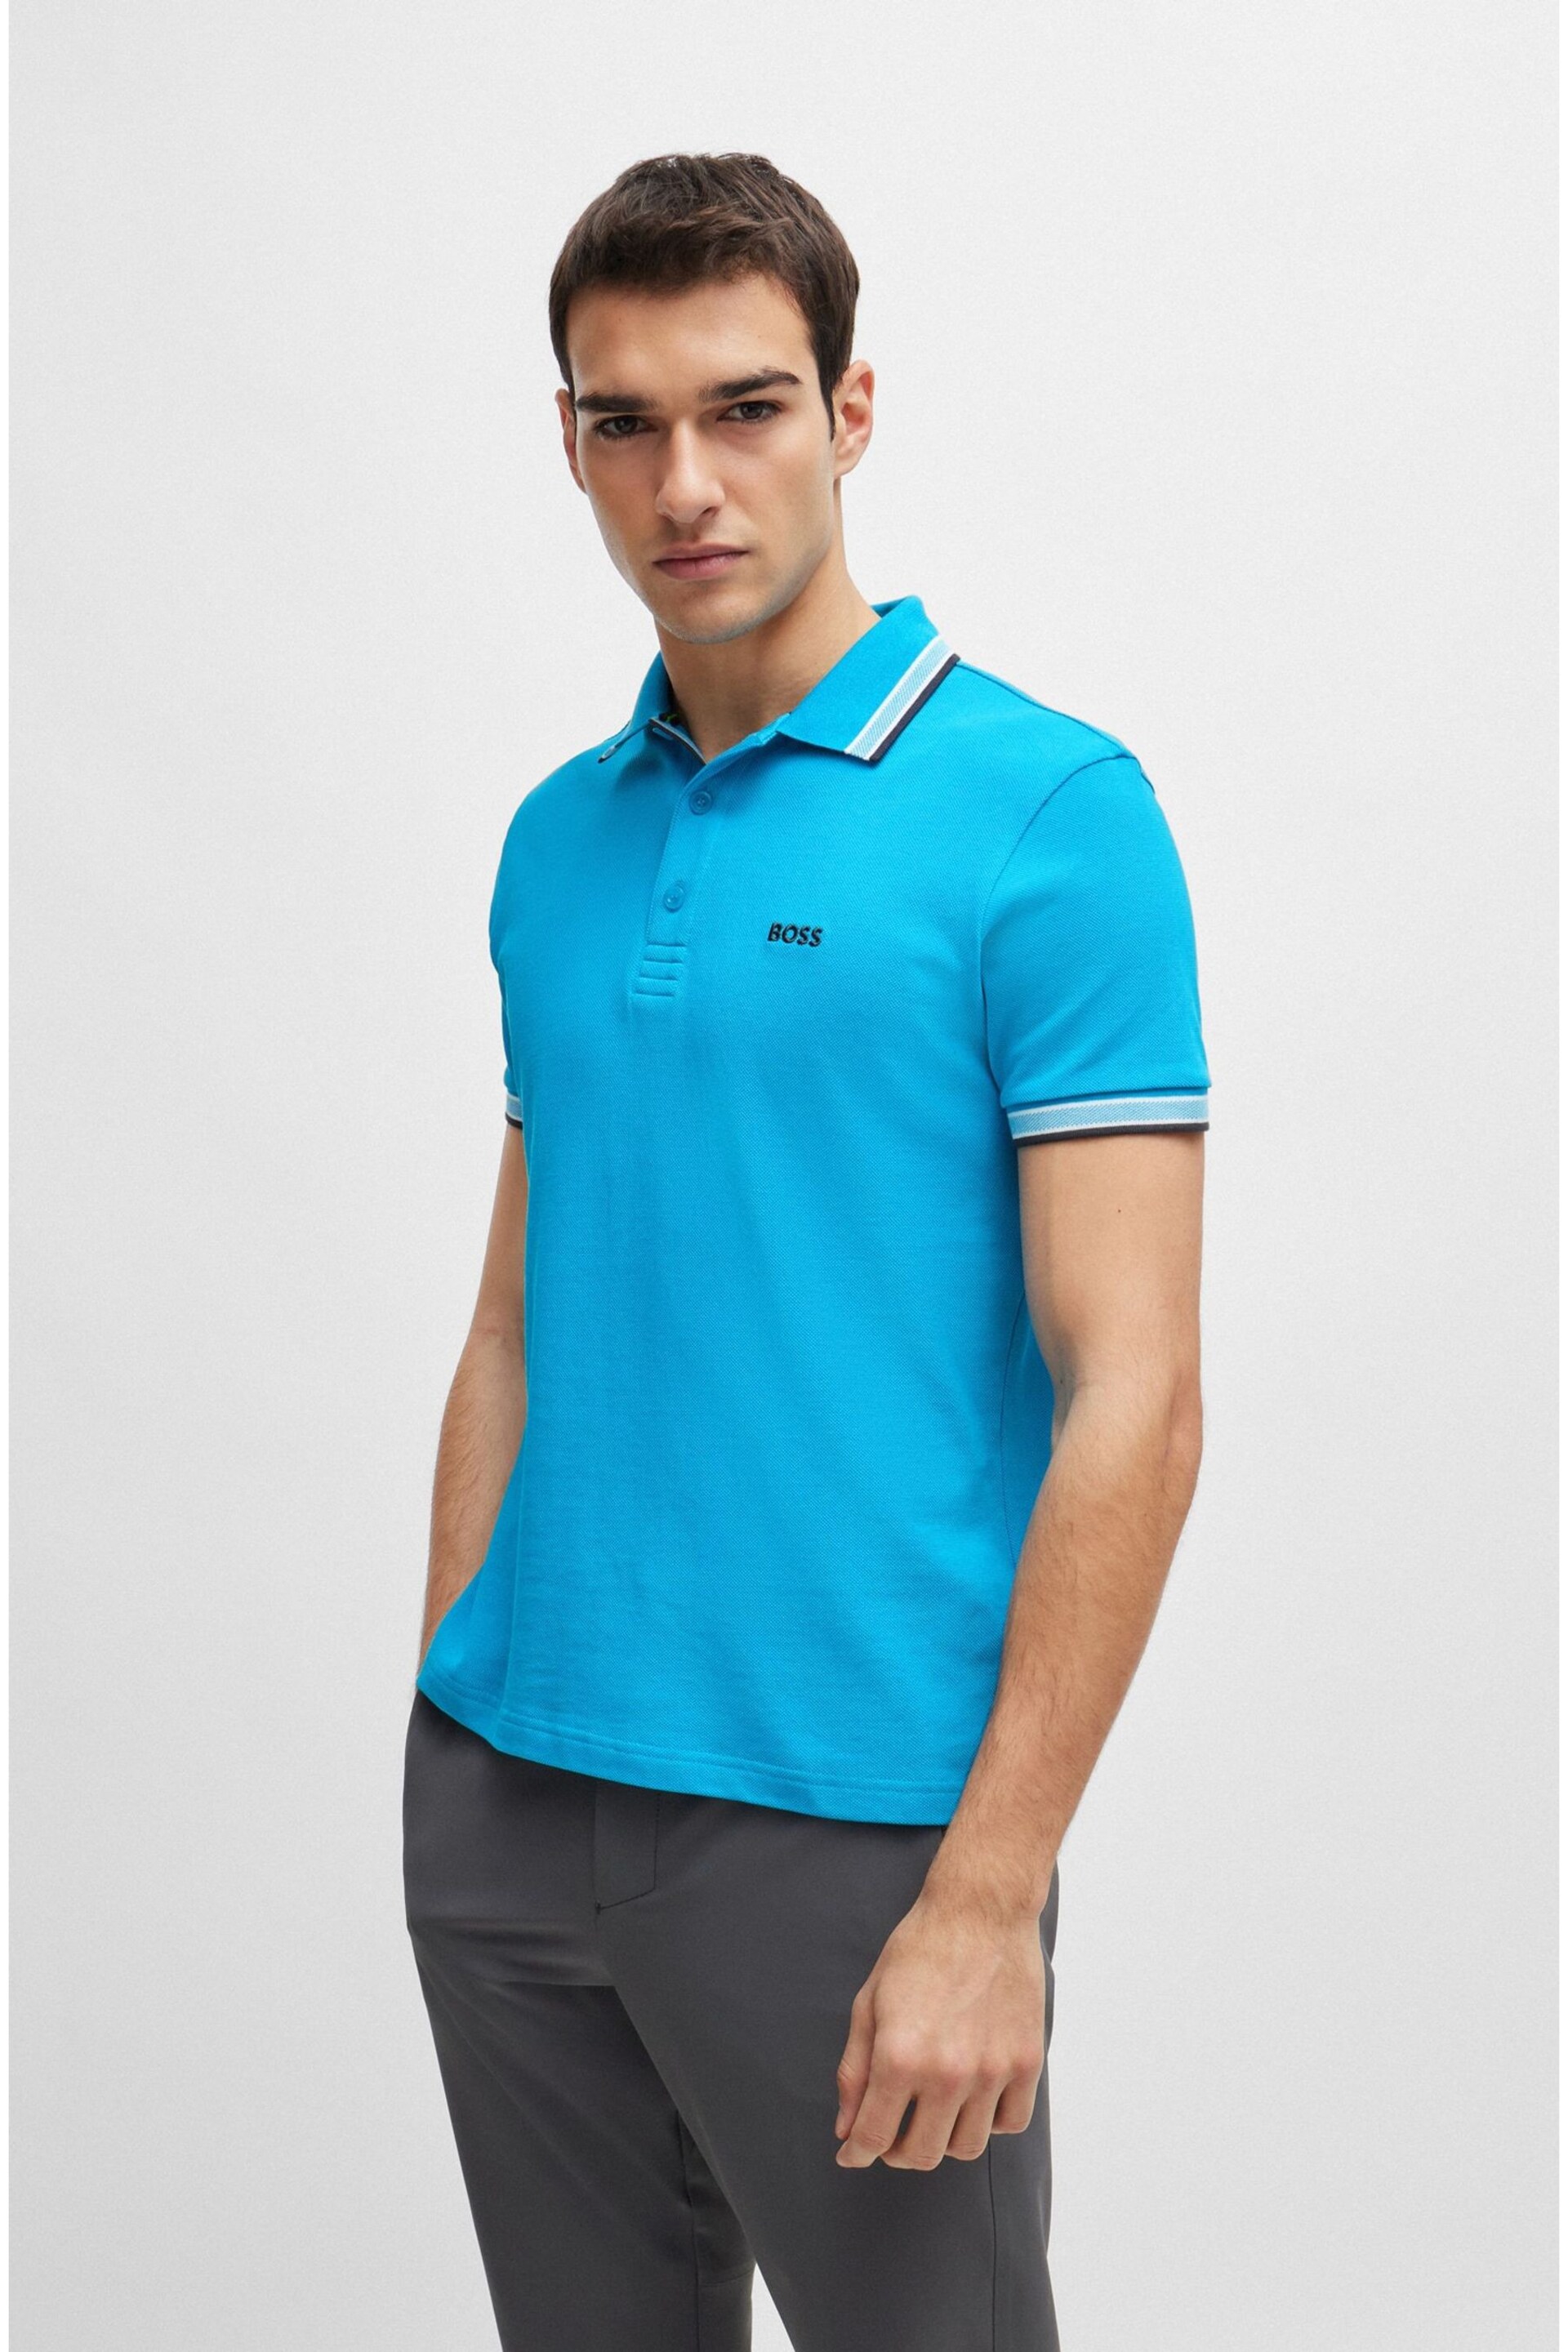 BOSS Blue Chrome Cotton Polo Shirt With Contrast Logo Details - Image 1 of 5